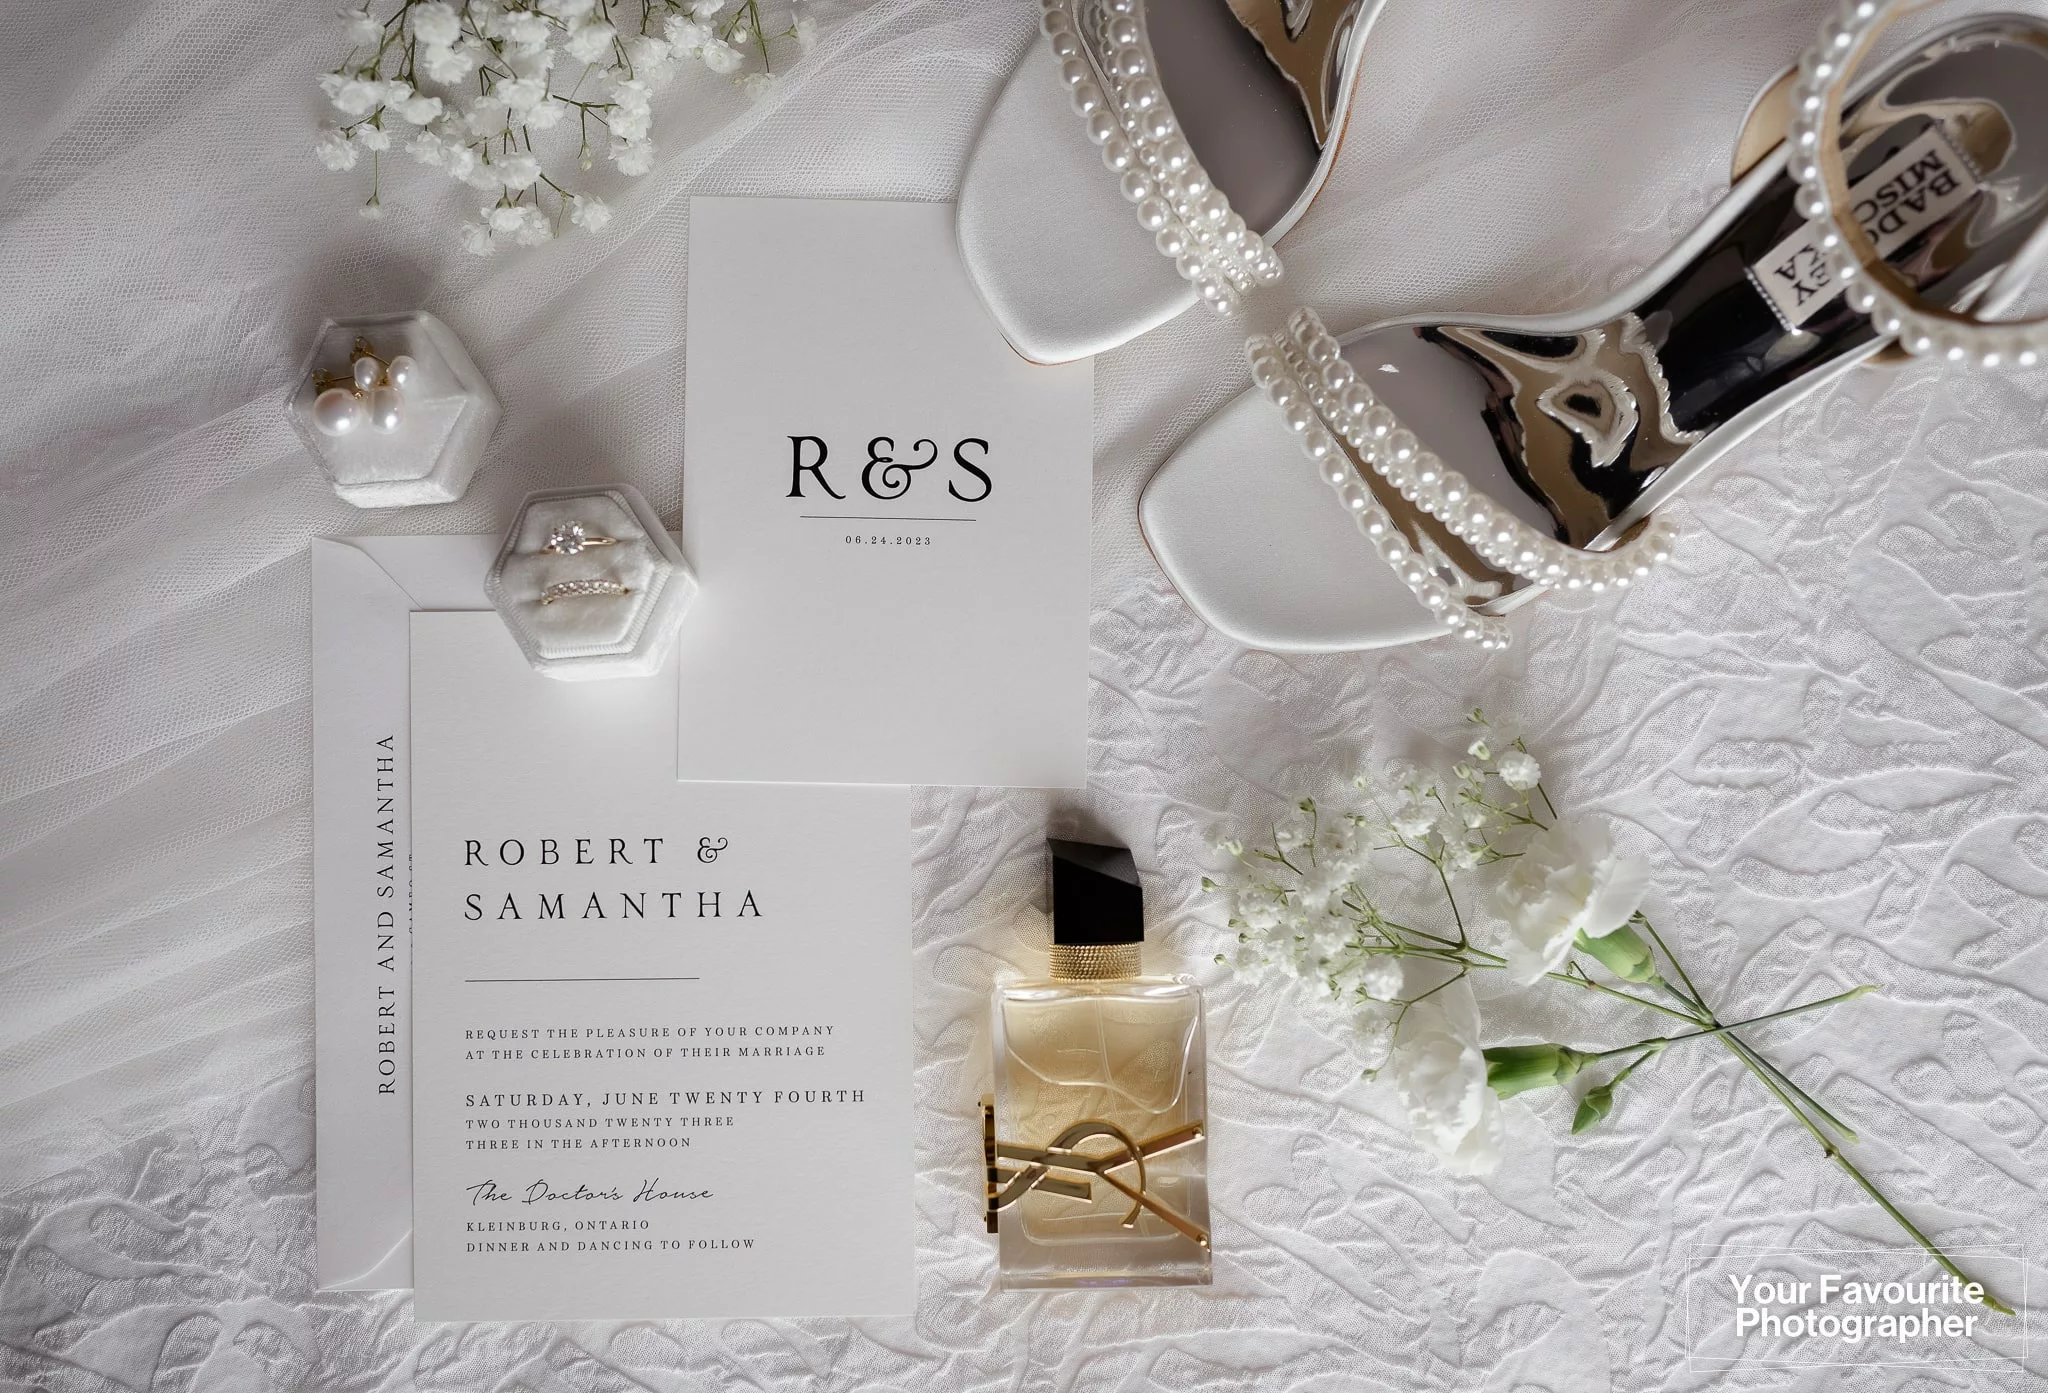 Flat lay of a bride's wedding accessories including YSL perfume, white flowers, a wedding invitation, wedding rings, and shoes